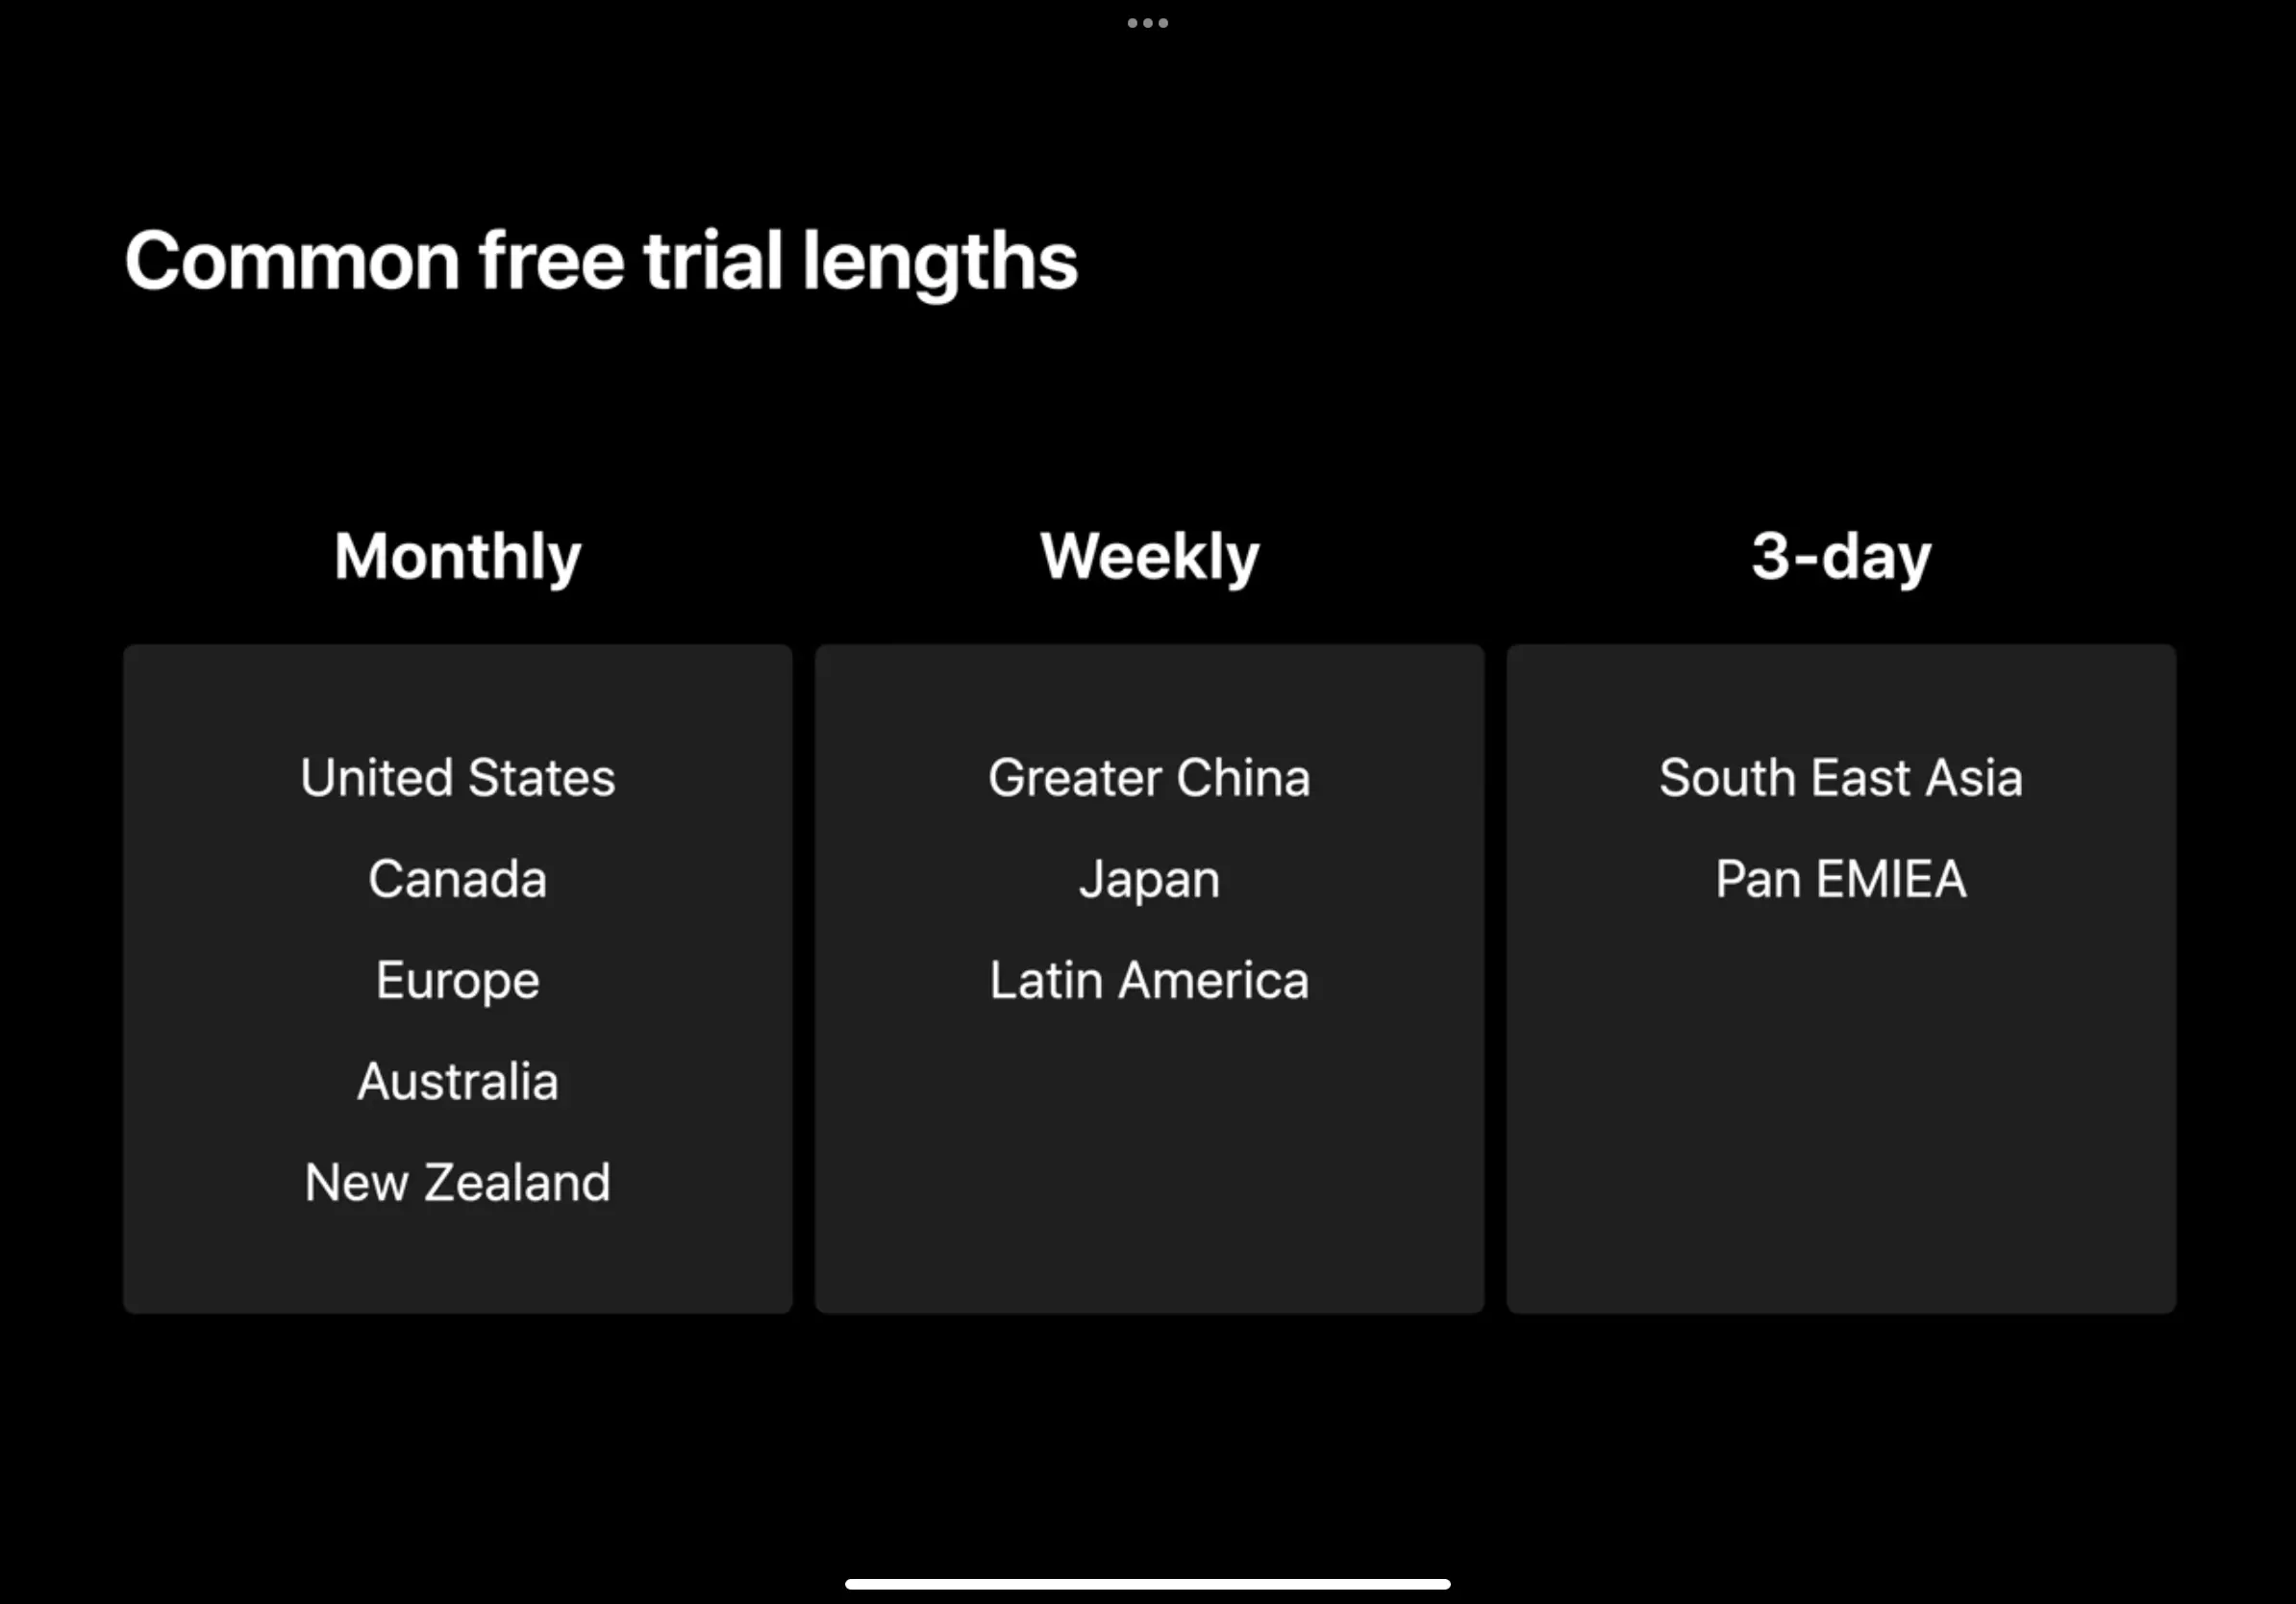 Average trial lengths vary from monthly in United States, Canada, Europe, Australia and New Zealand to weekly, Greater China, Japan and Latin America. 3 Day trials are most popular in South East Asia and an EMIEA.